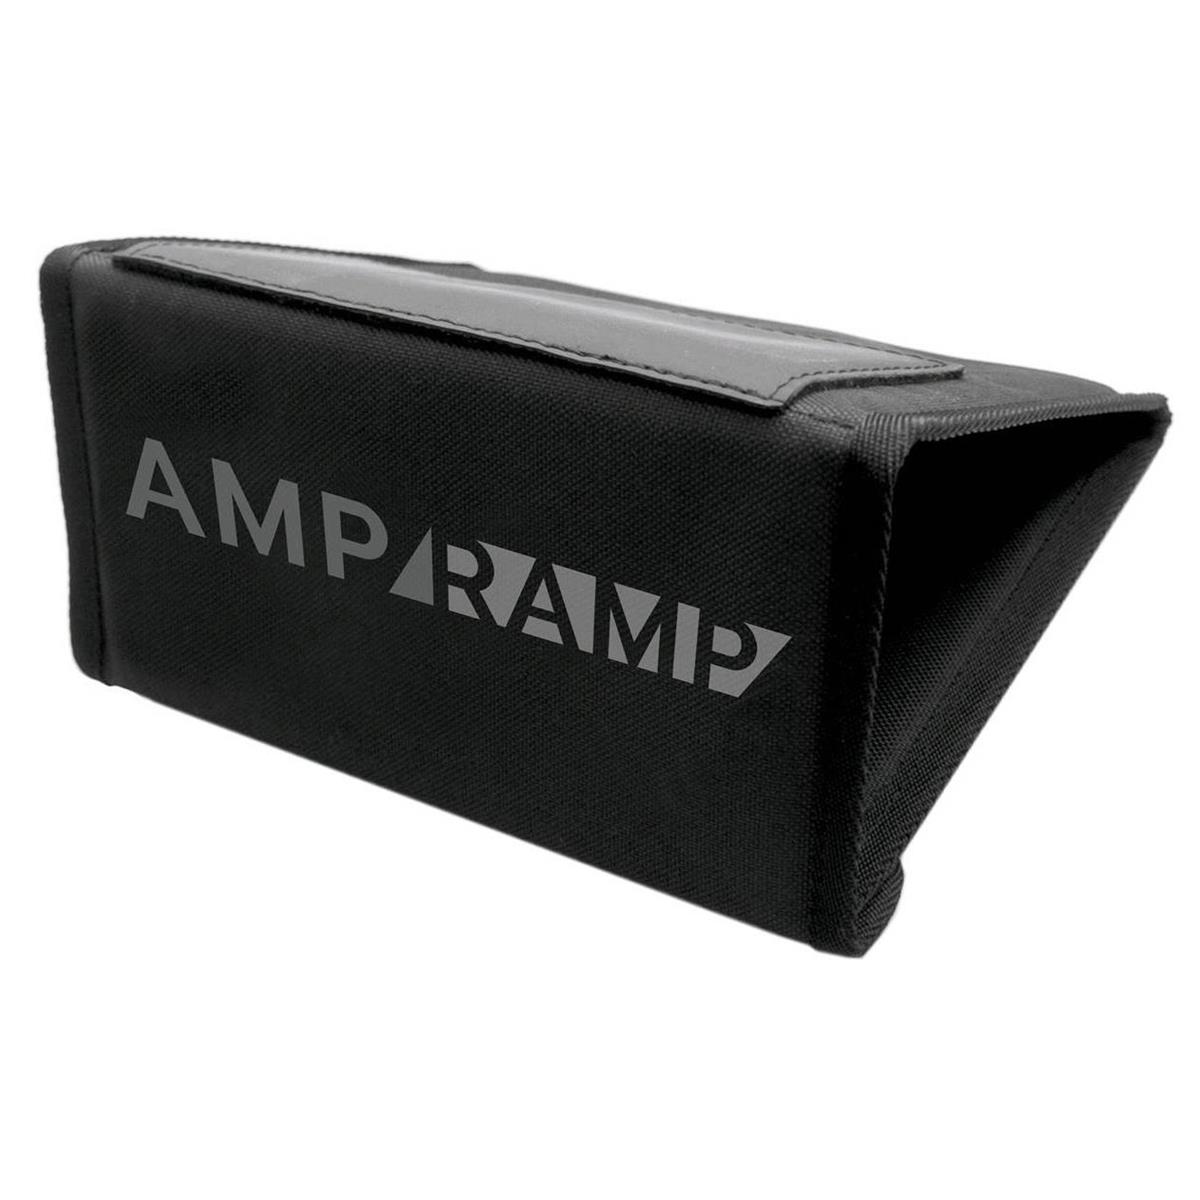 Image of Outlaw Amp Ramp Wedge Support for Guitar Amp